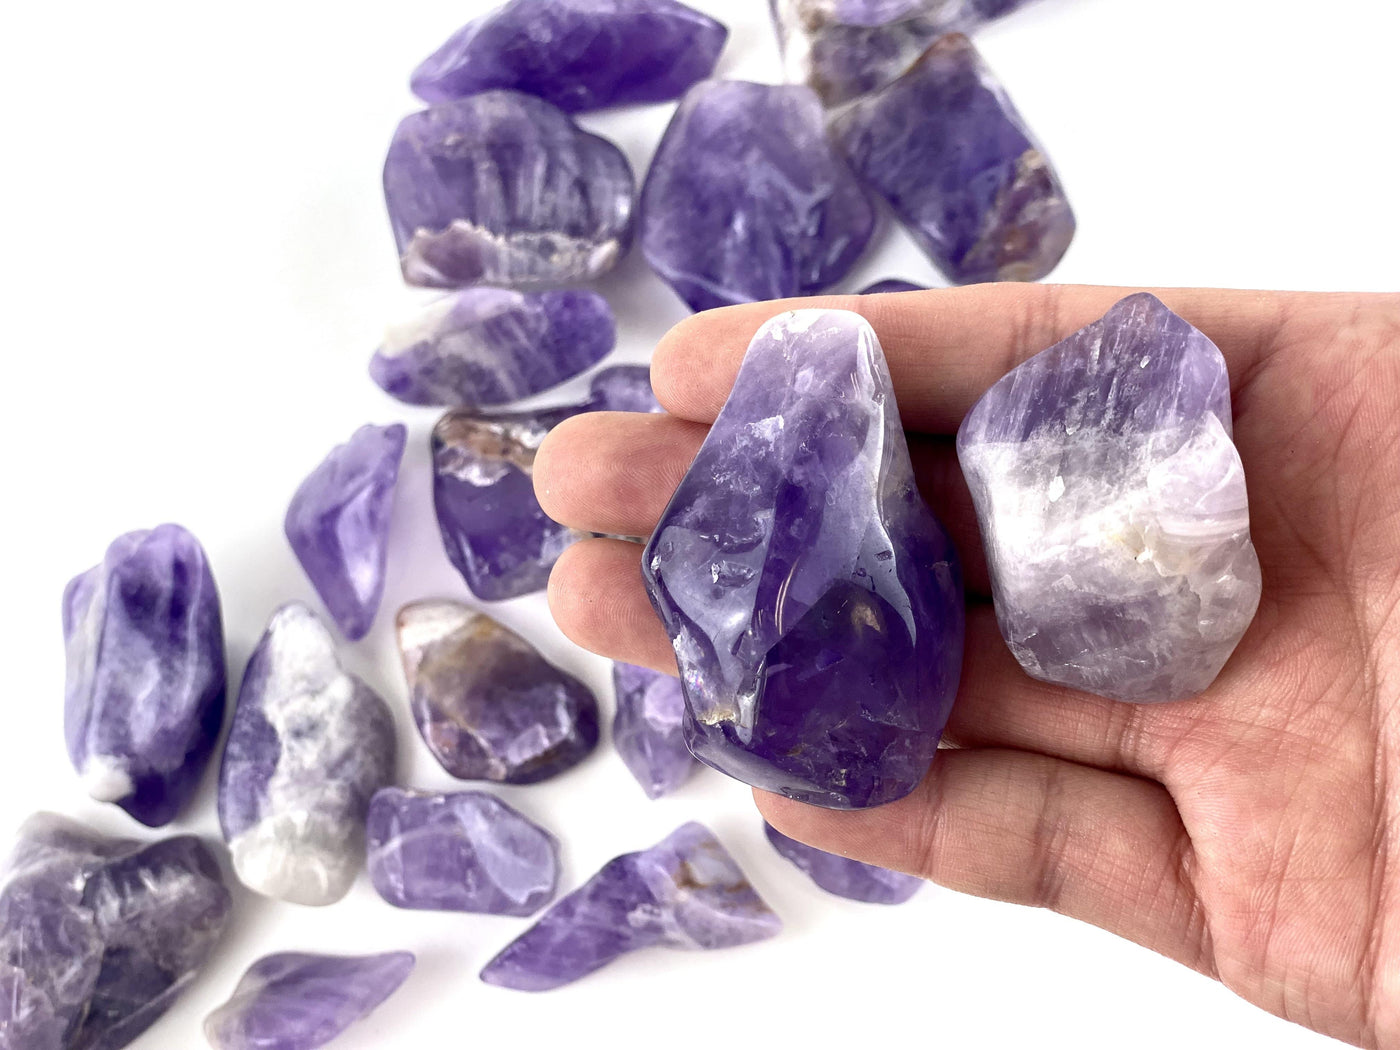 Amethyst Tumbled Stones in hand for size comparison